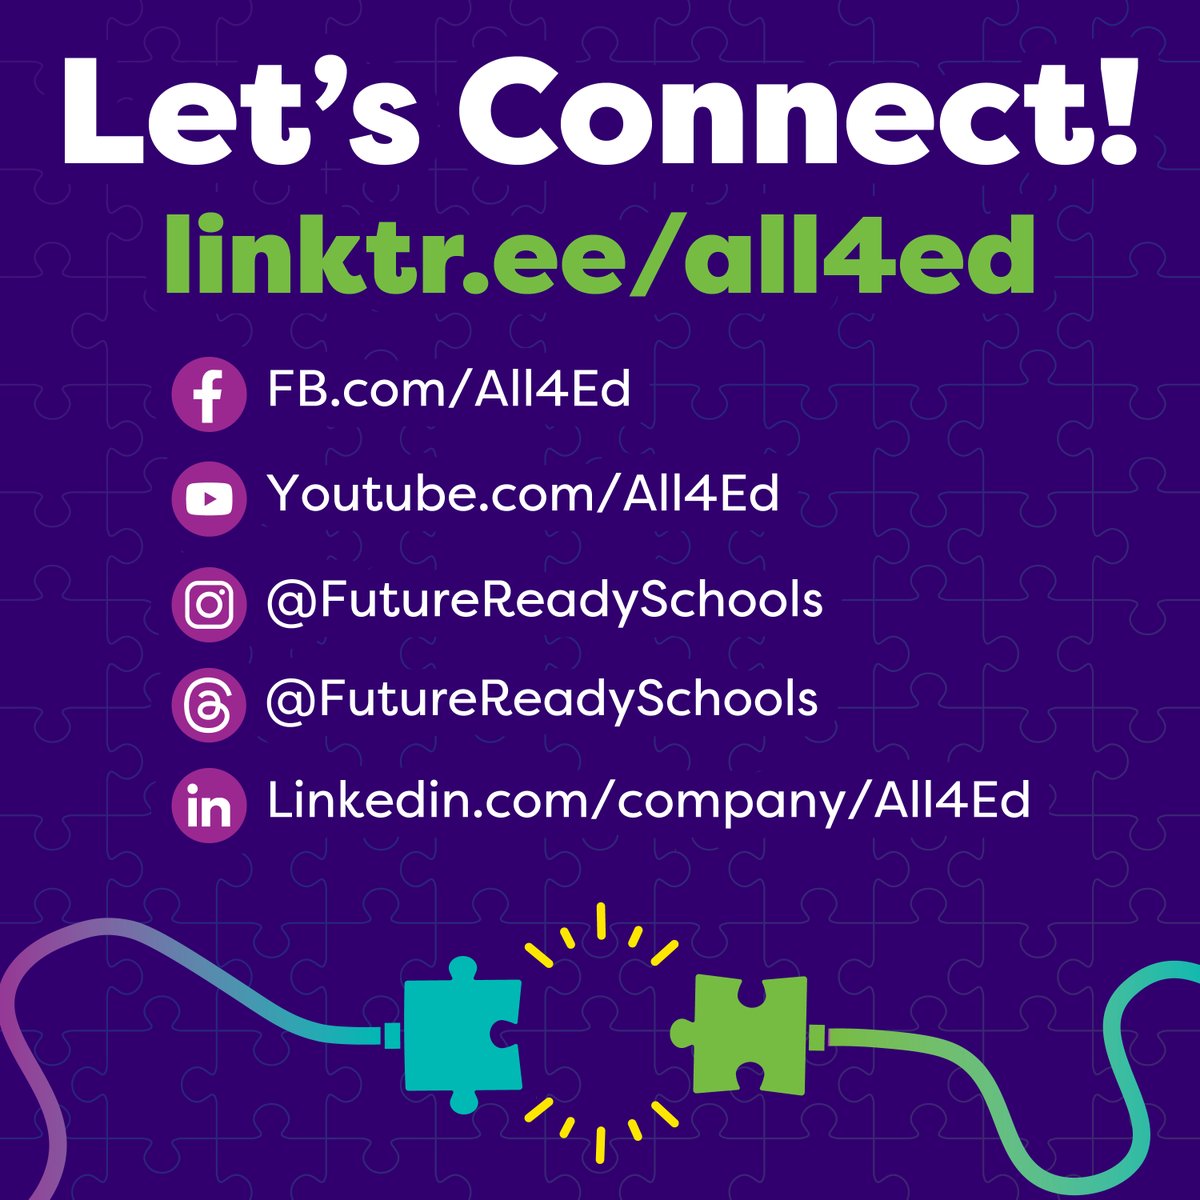 Are you following us on other platforms? Don't be a missing piece of the puzzle! Find out more about us: all4ed.org Find our socials: linktr.ee/all4ed